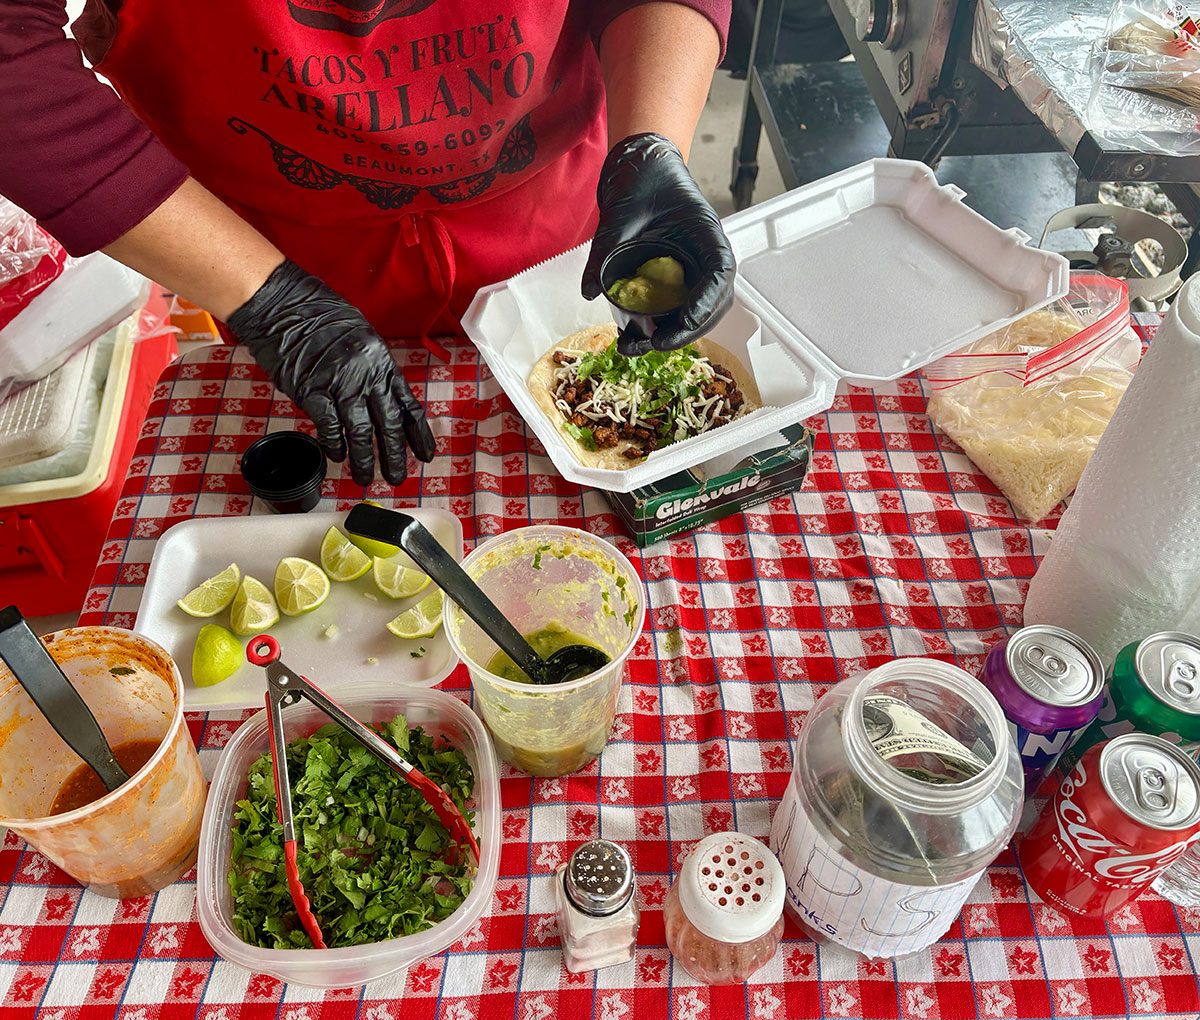 Gloria Arellano, owner of Tacos Y Fruta, serves pork tacos at Spindletop Gladys City Boomtown Museum, Feb. 8